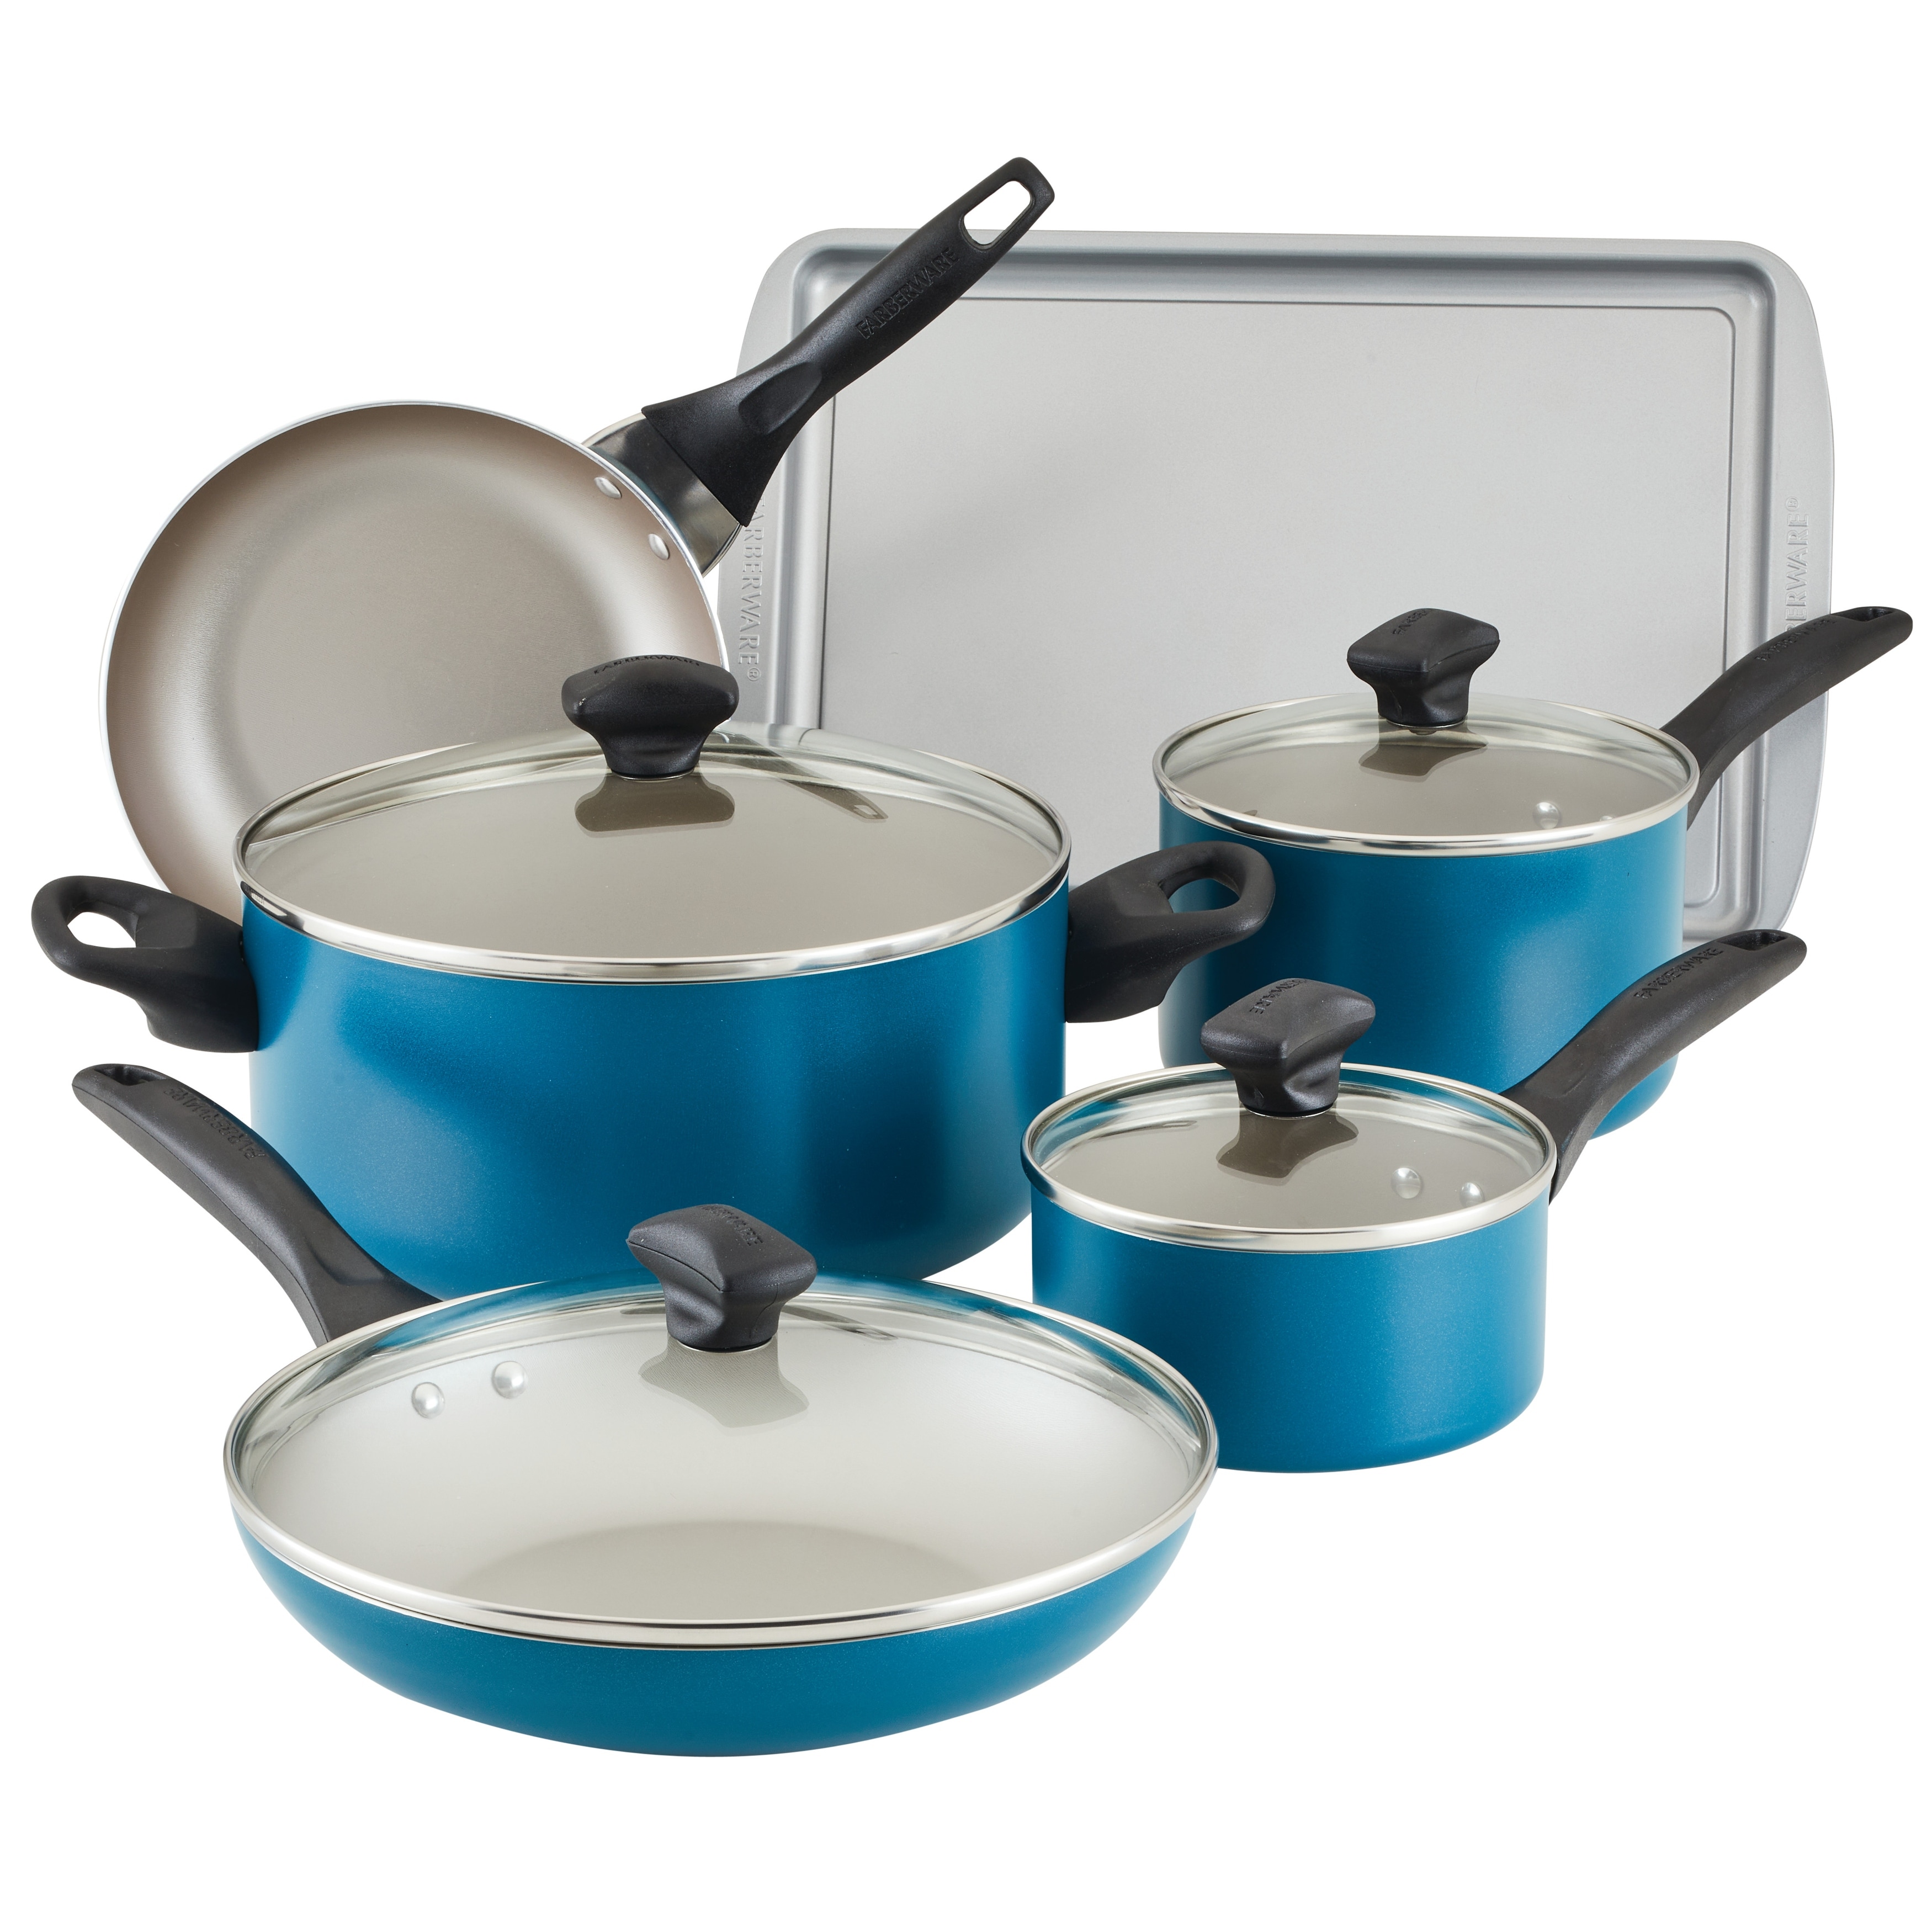 https://ak1.ostkcdn.com/images/products/is/images/direct/2e256a2fc3bca95f9c95c0d0d03263cd5852f888/Farberware-Dishwasher-Safe-Nonstick-Cookware-Set%2C-Teal%2C-15-Piece.jpg